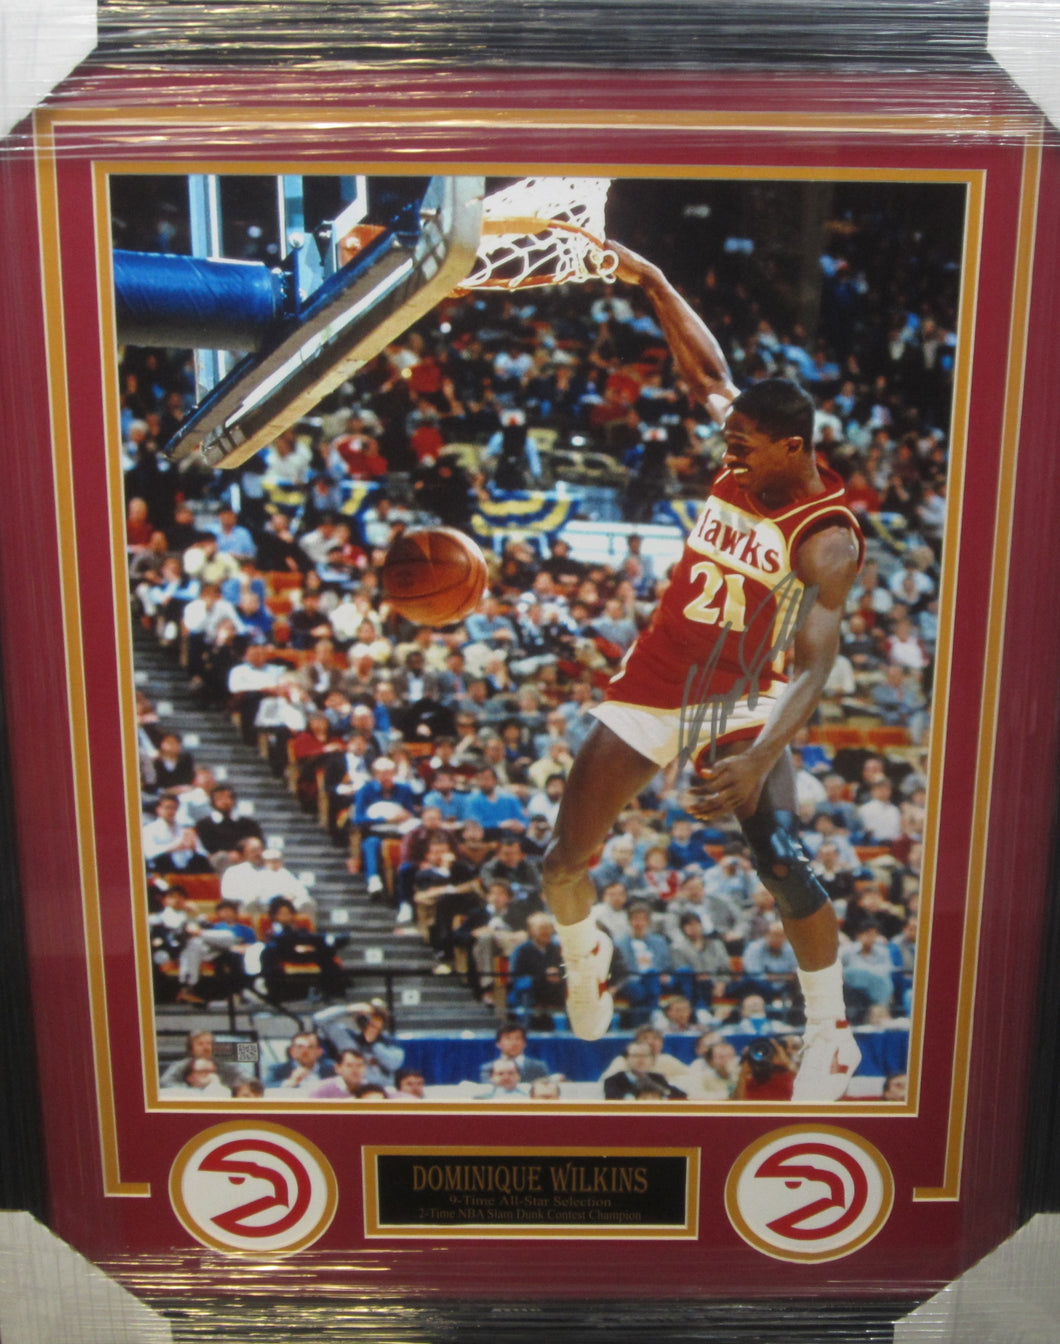 Atlanta Hawks Dominique Wilkins Signed 16x20 Photo Framed & Matted with TRISTAR COA